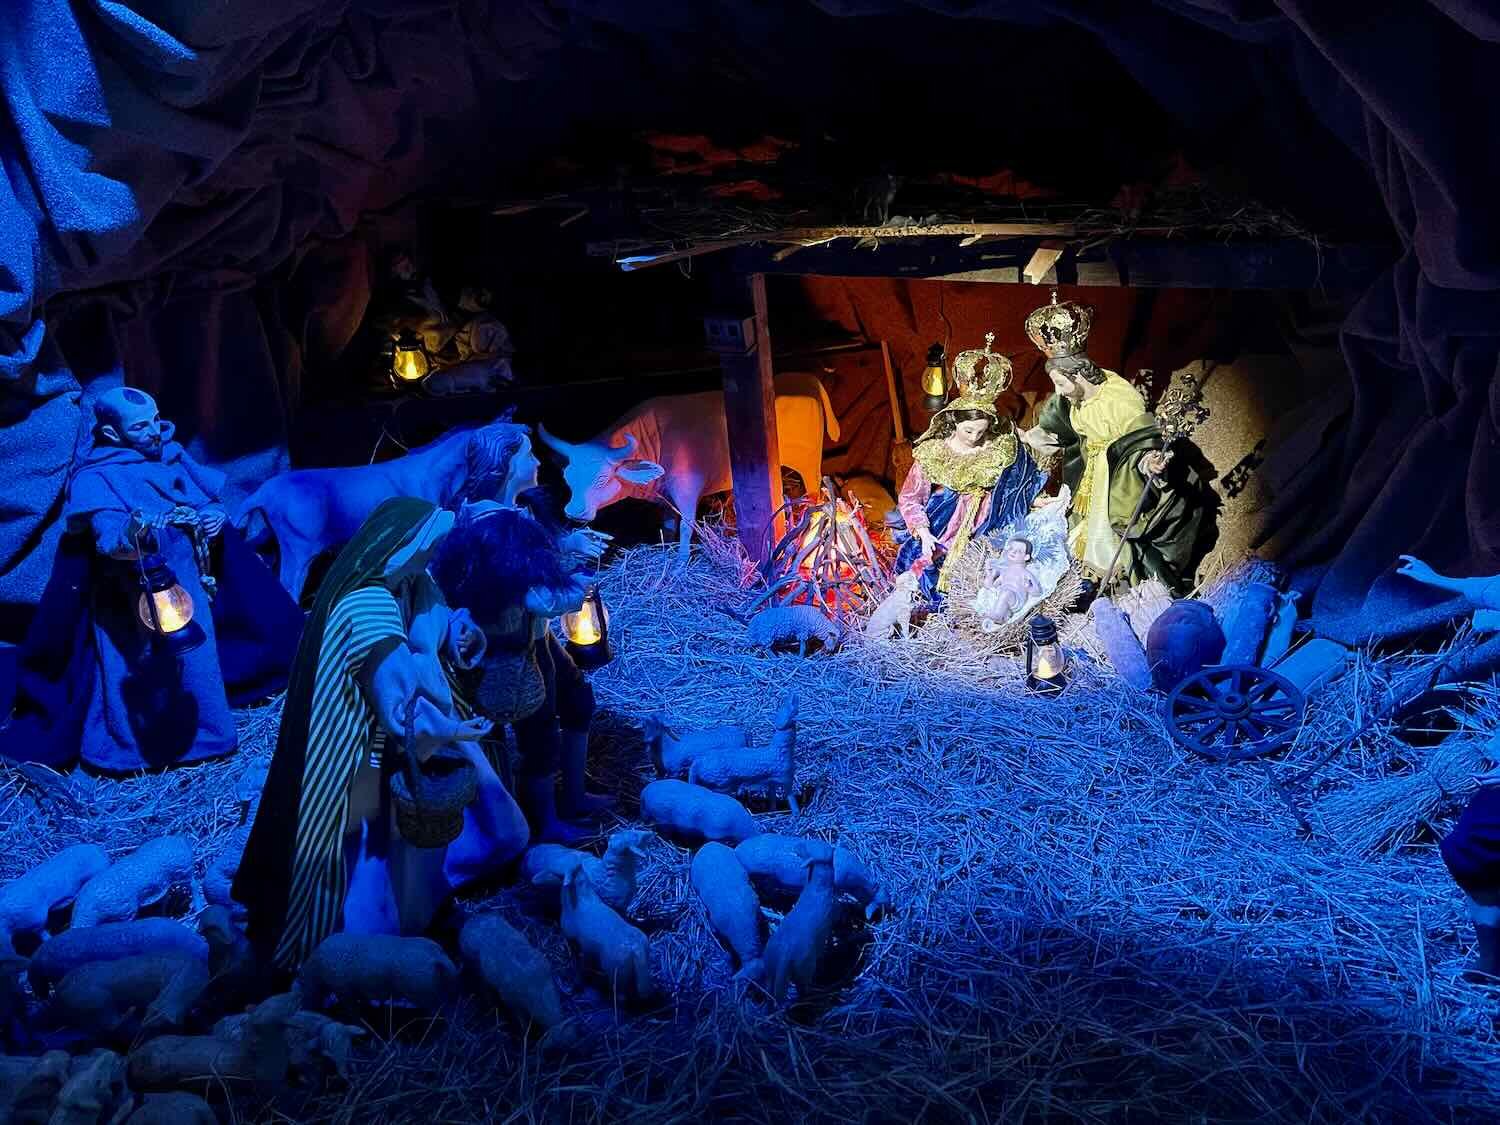 Nativity scenes were set up all over town